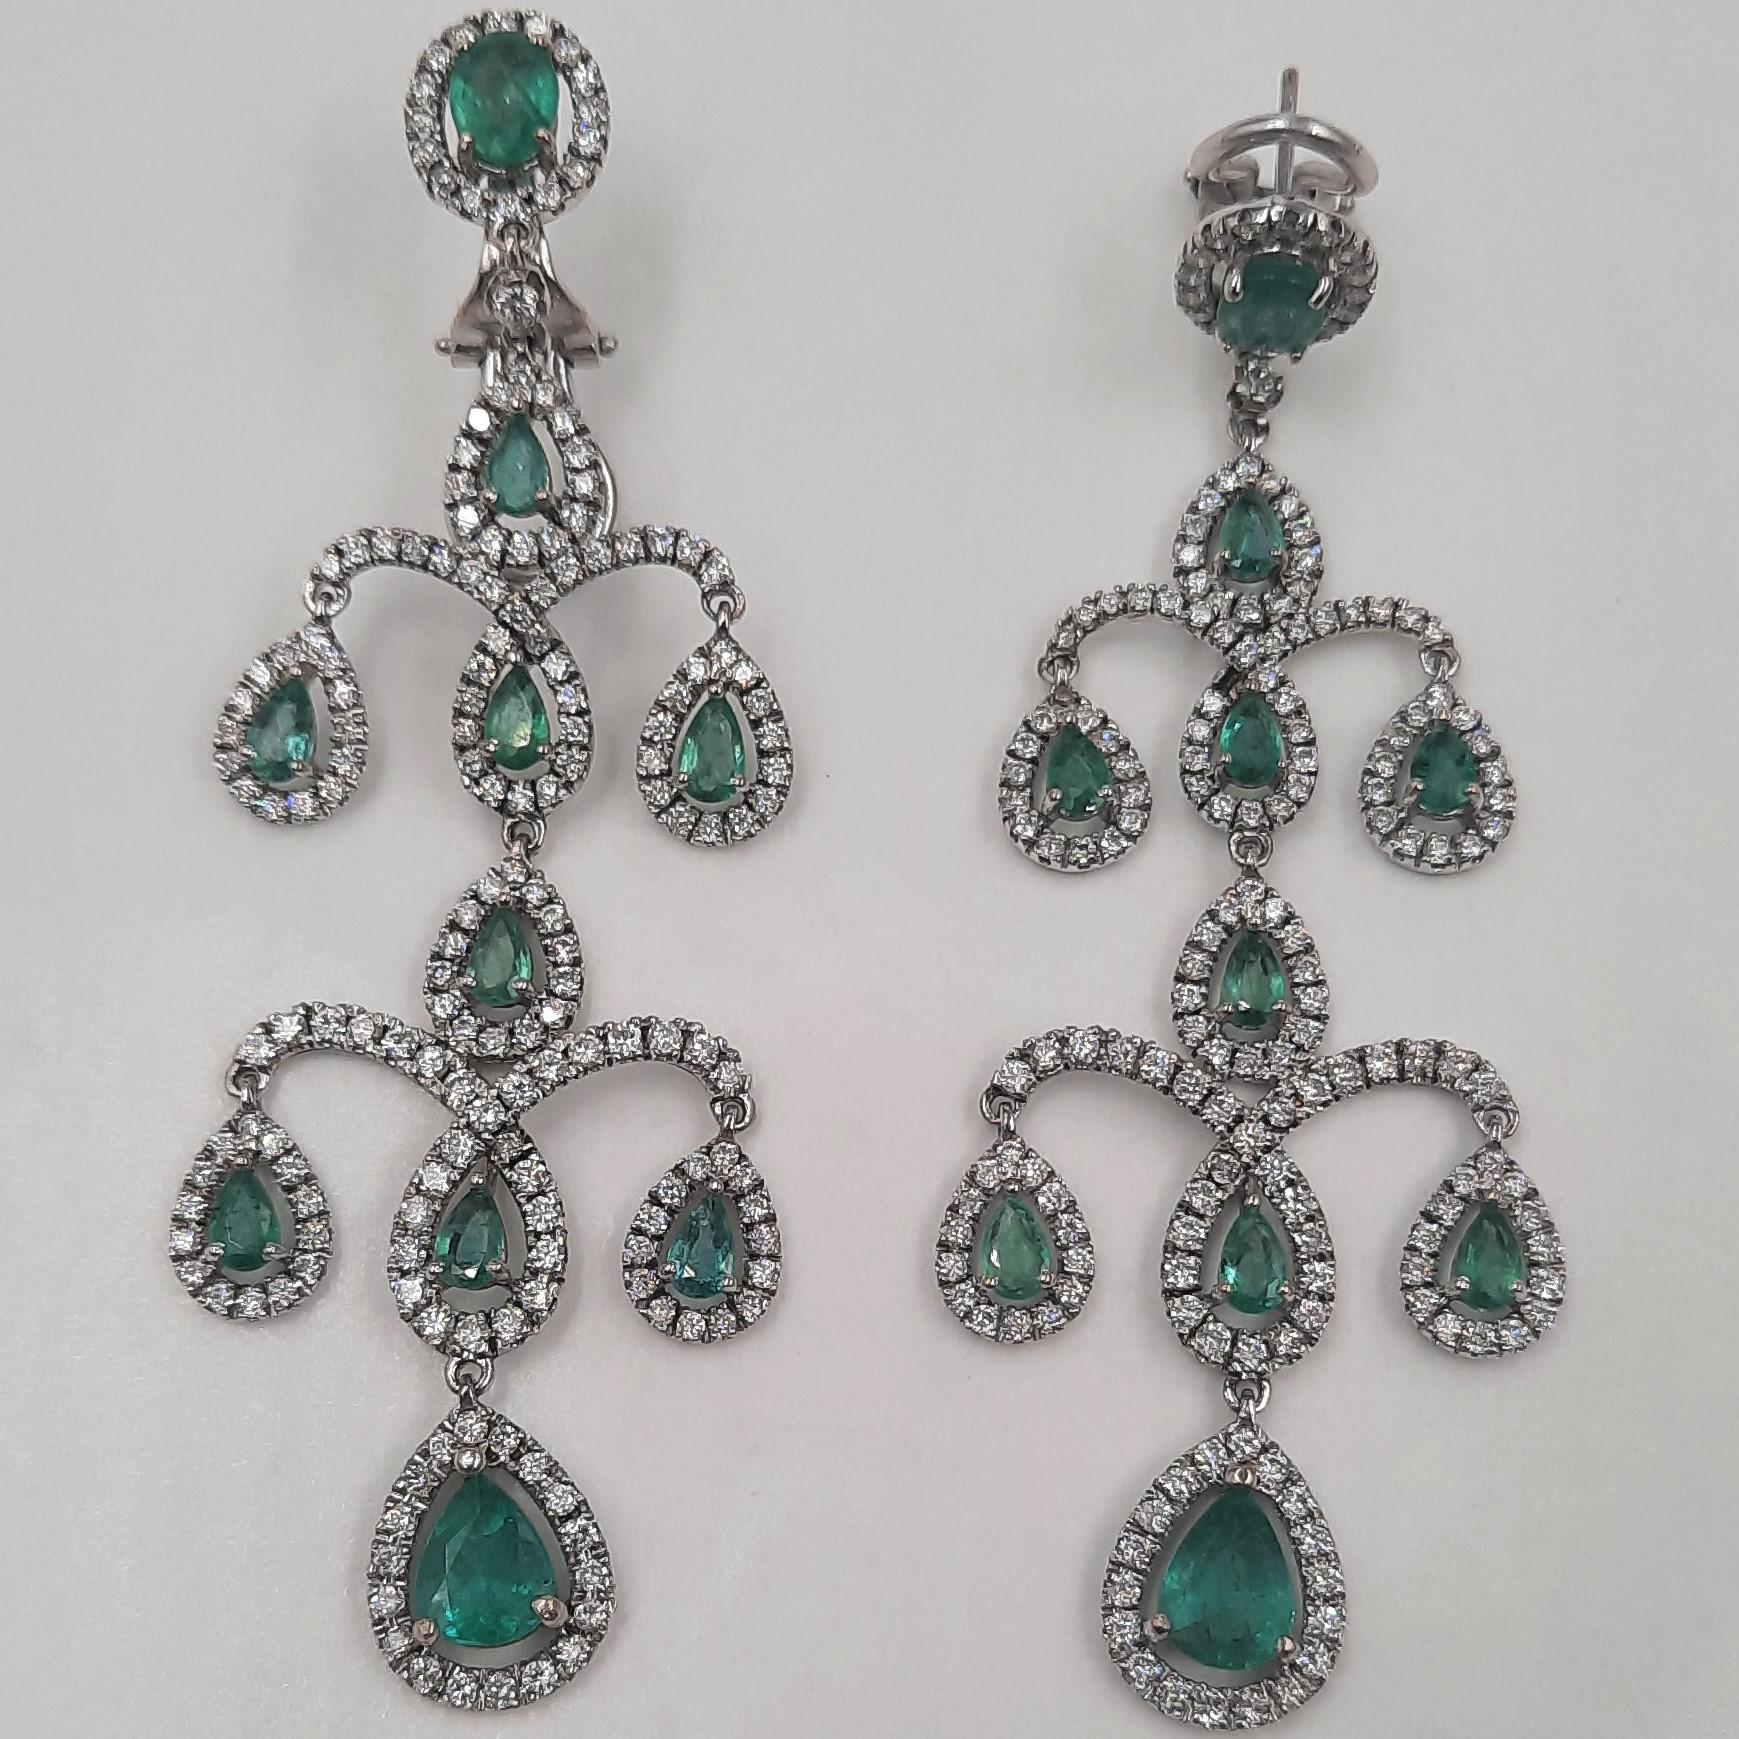 Magnificent emerald  (4.55 carats), white Brilliant cut diamond (4.02 carats) and 18 carats white gold (17.2 grams) chandelier earrings.  